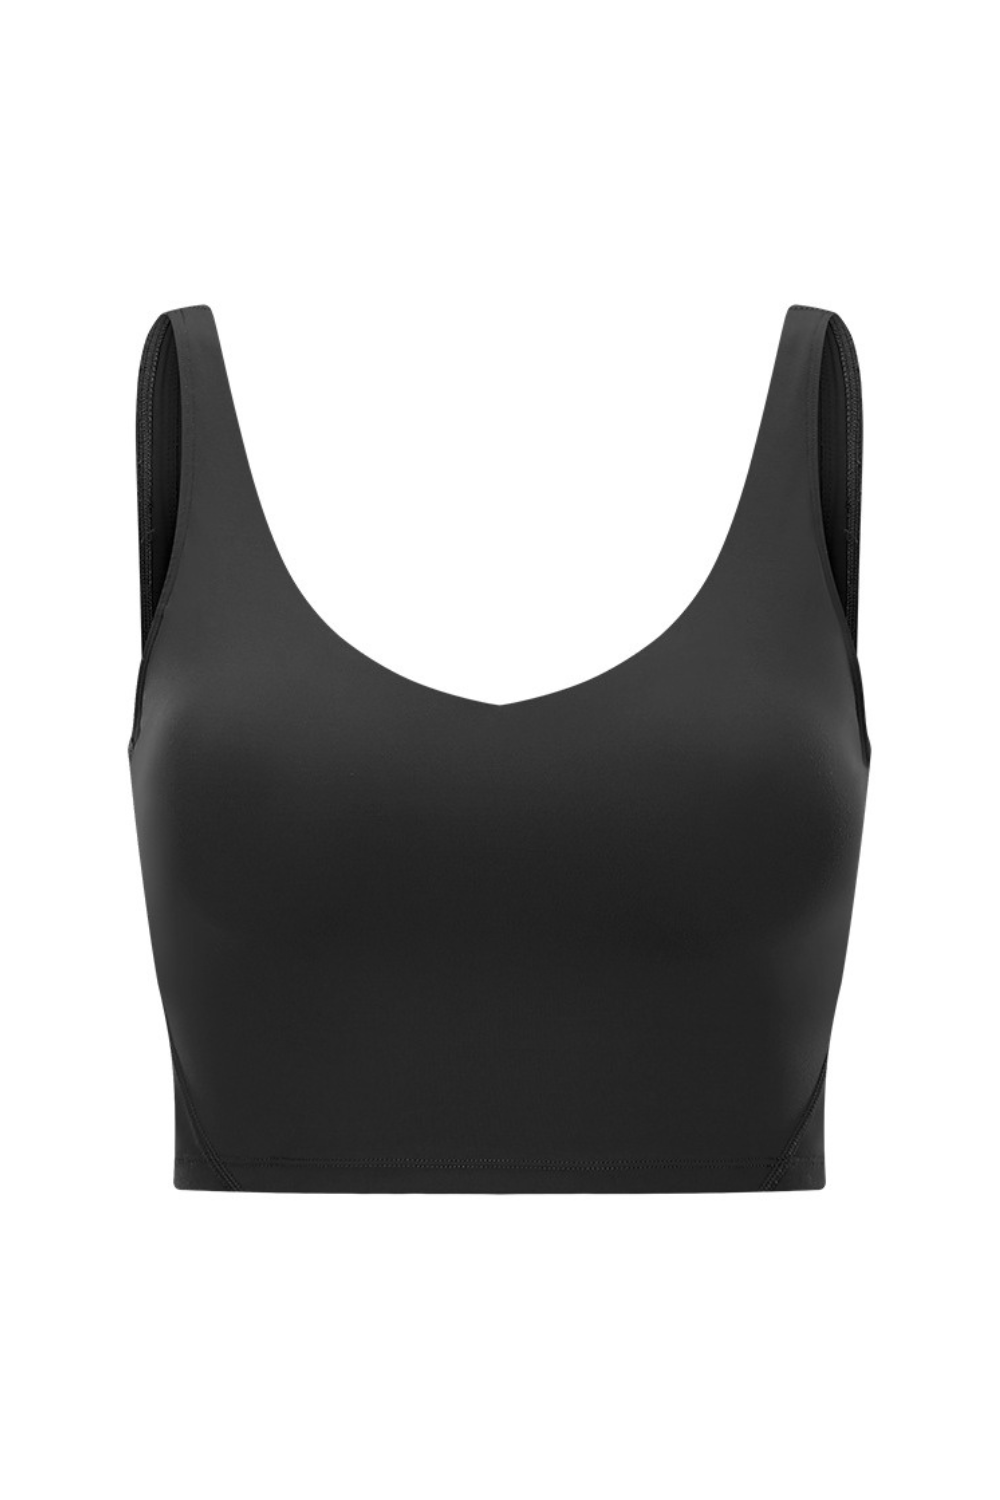 Navalora Fit Arabelle Longline Bra with Removable Pads Align Tank in Black